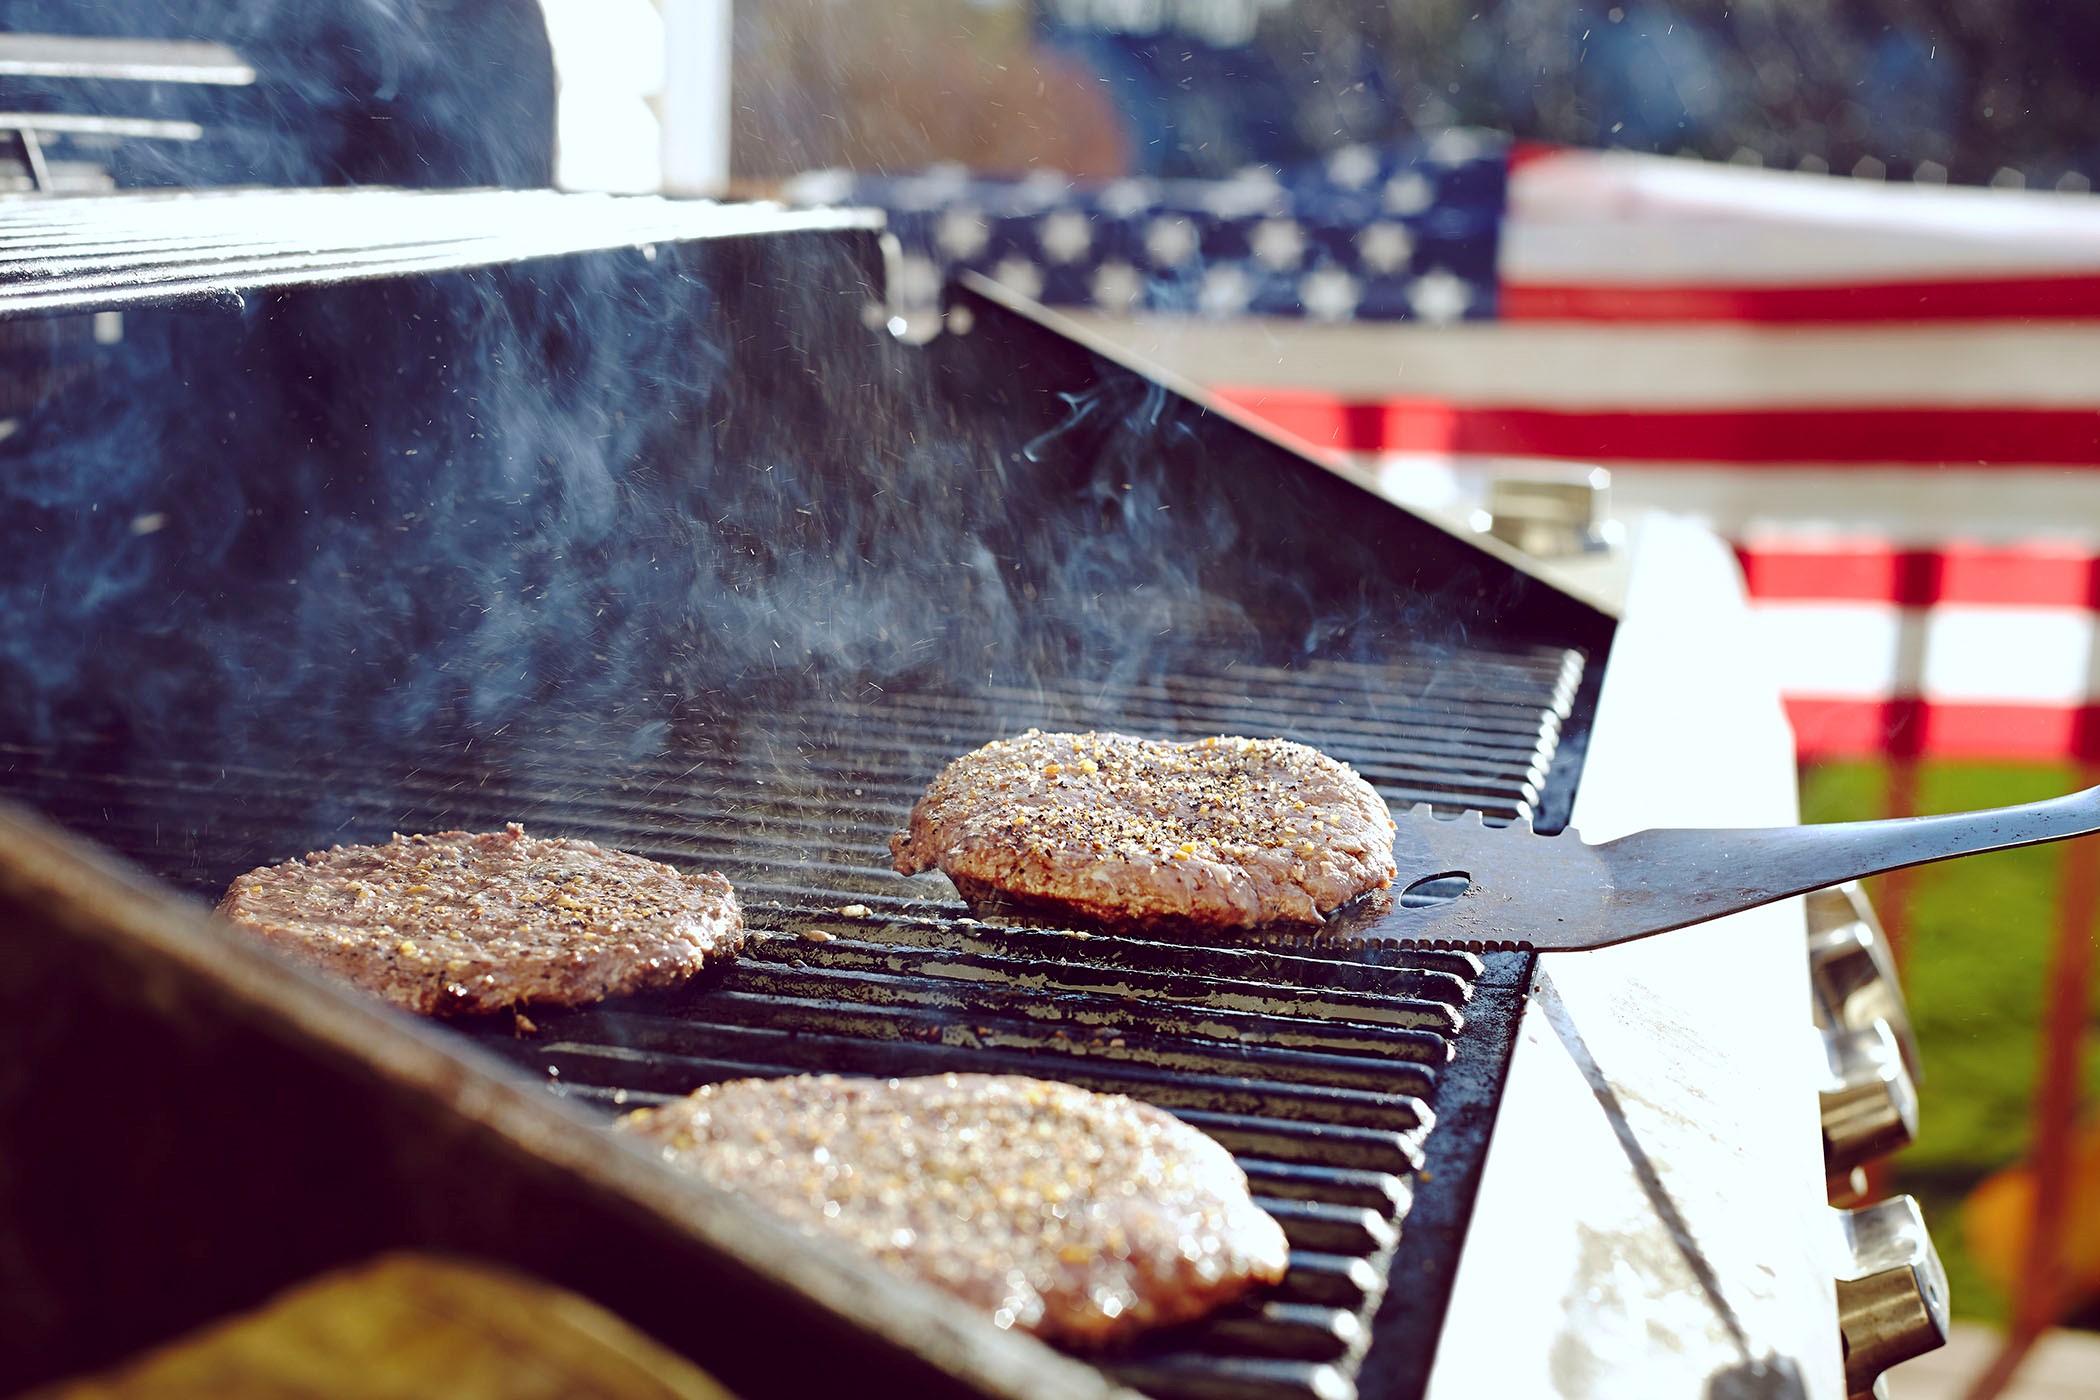 Grilling Season is Upon Us - Beef Demand Expected to Climb as Markets Approach Seasonal Peaks